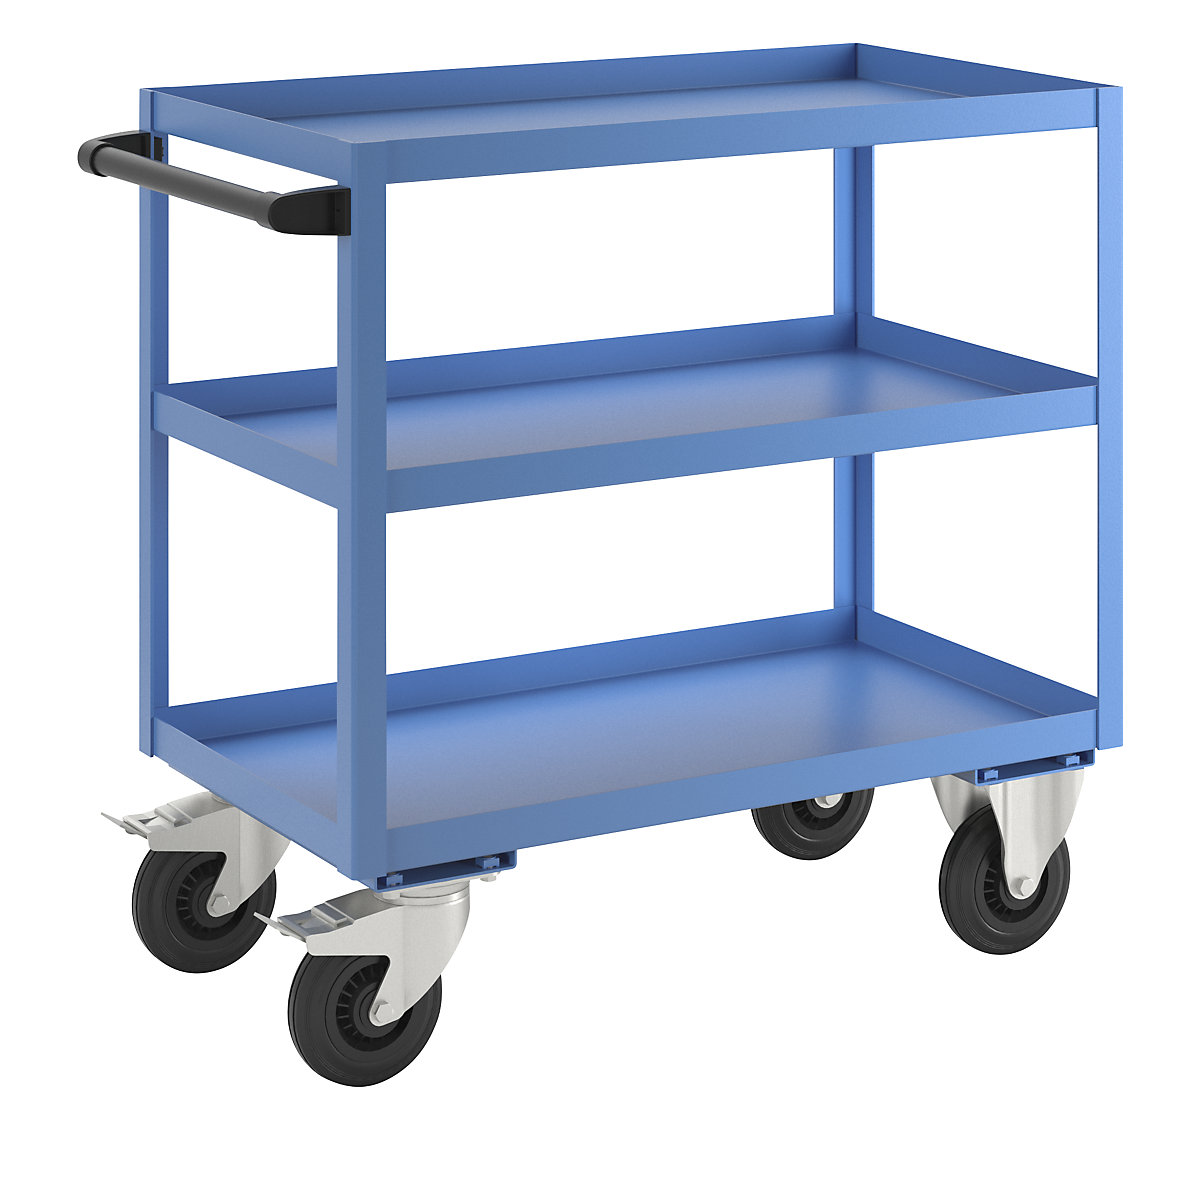 General purpose trolley – eurokraft pro, 3 shelves, max. load 350 kg, overall height 915 mm, light blue-2